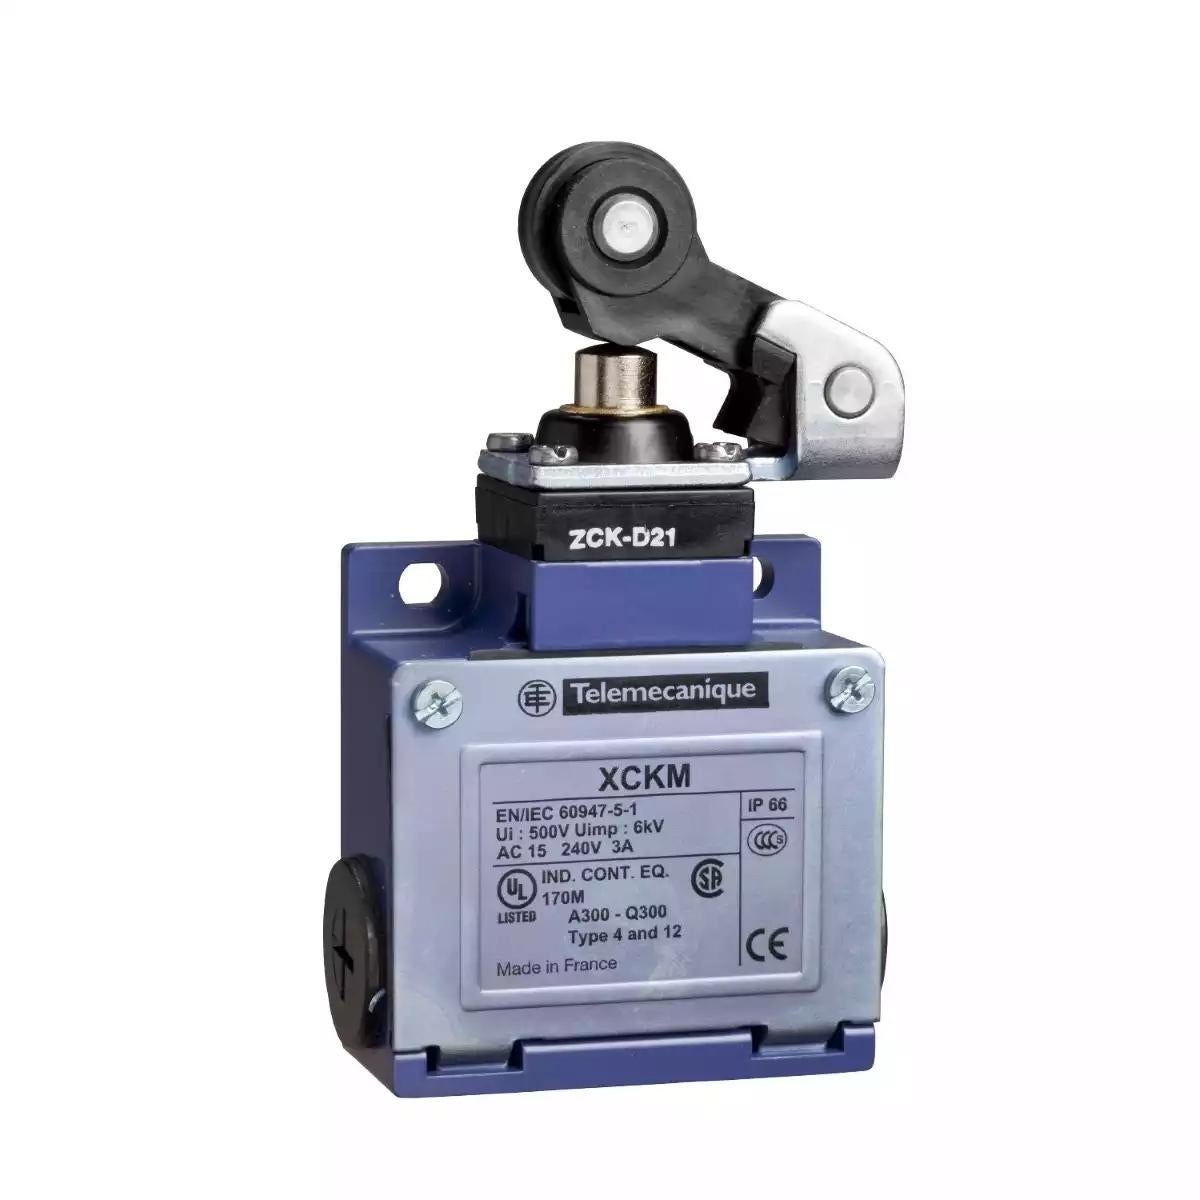 OsiSense XC Standard limit switch XCKM - thermoplastic roller lever plunger - 1NC+1NO - snap - M20 